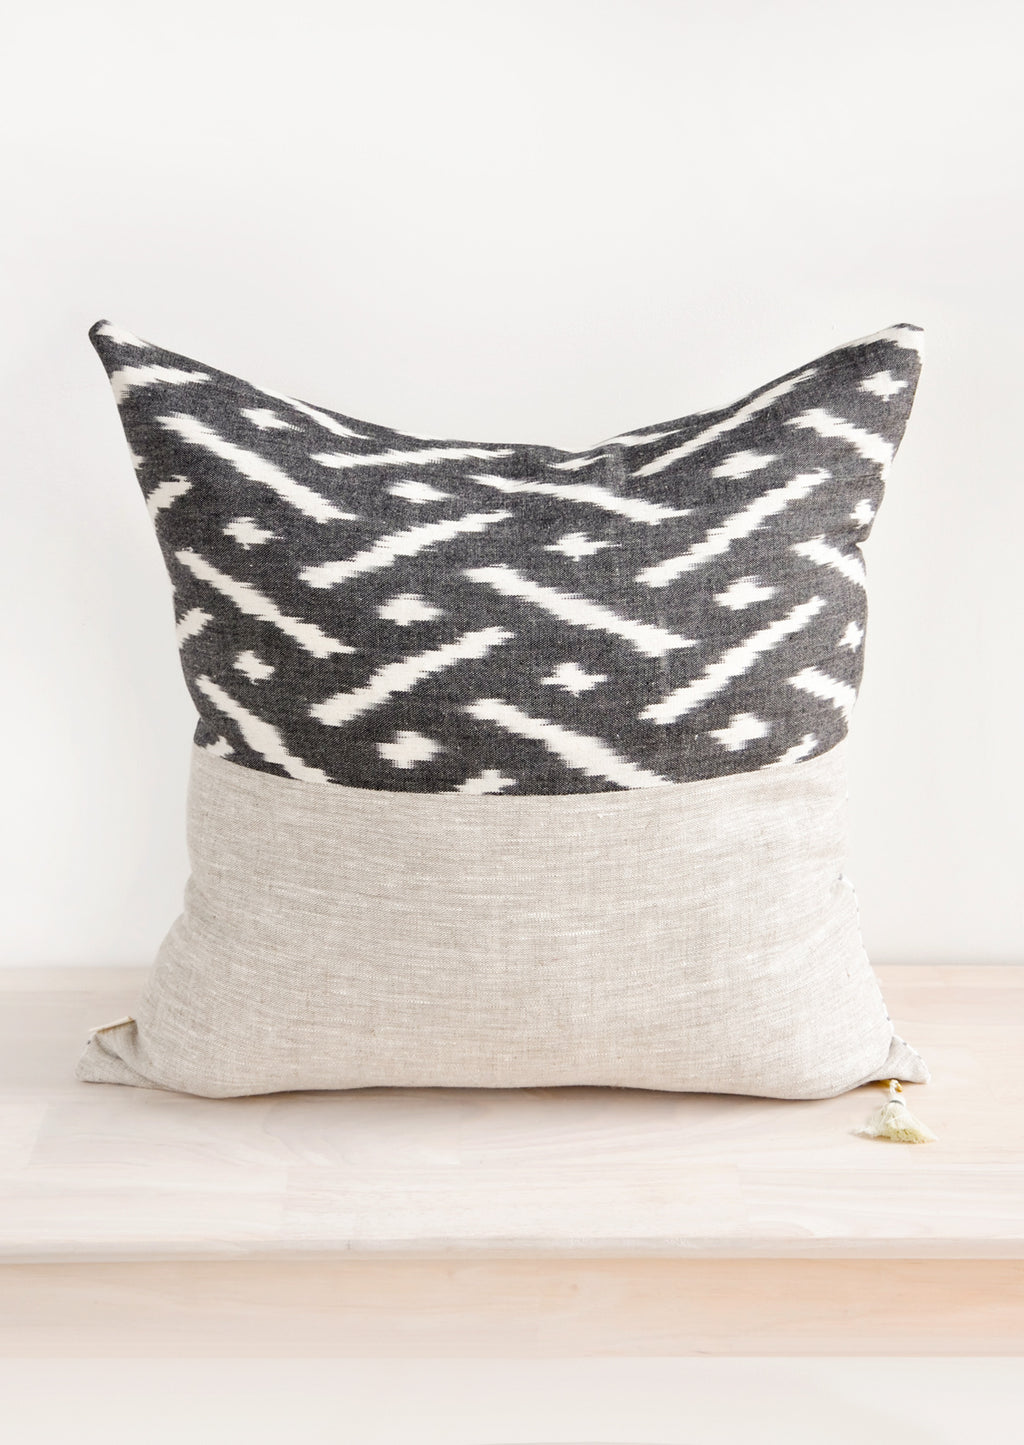 2: Square throw pillow in reversible design with contrasting black and white fabric on front and back